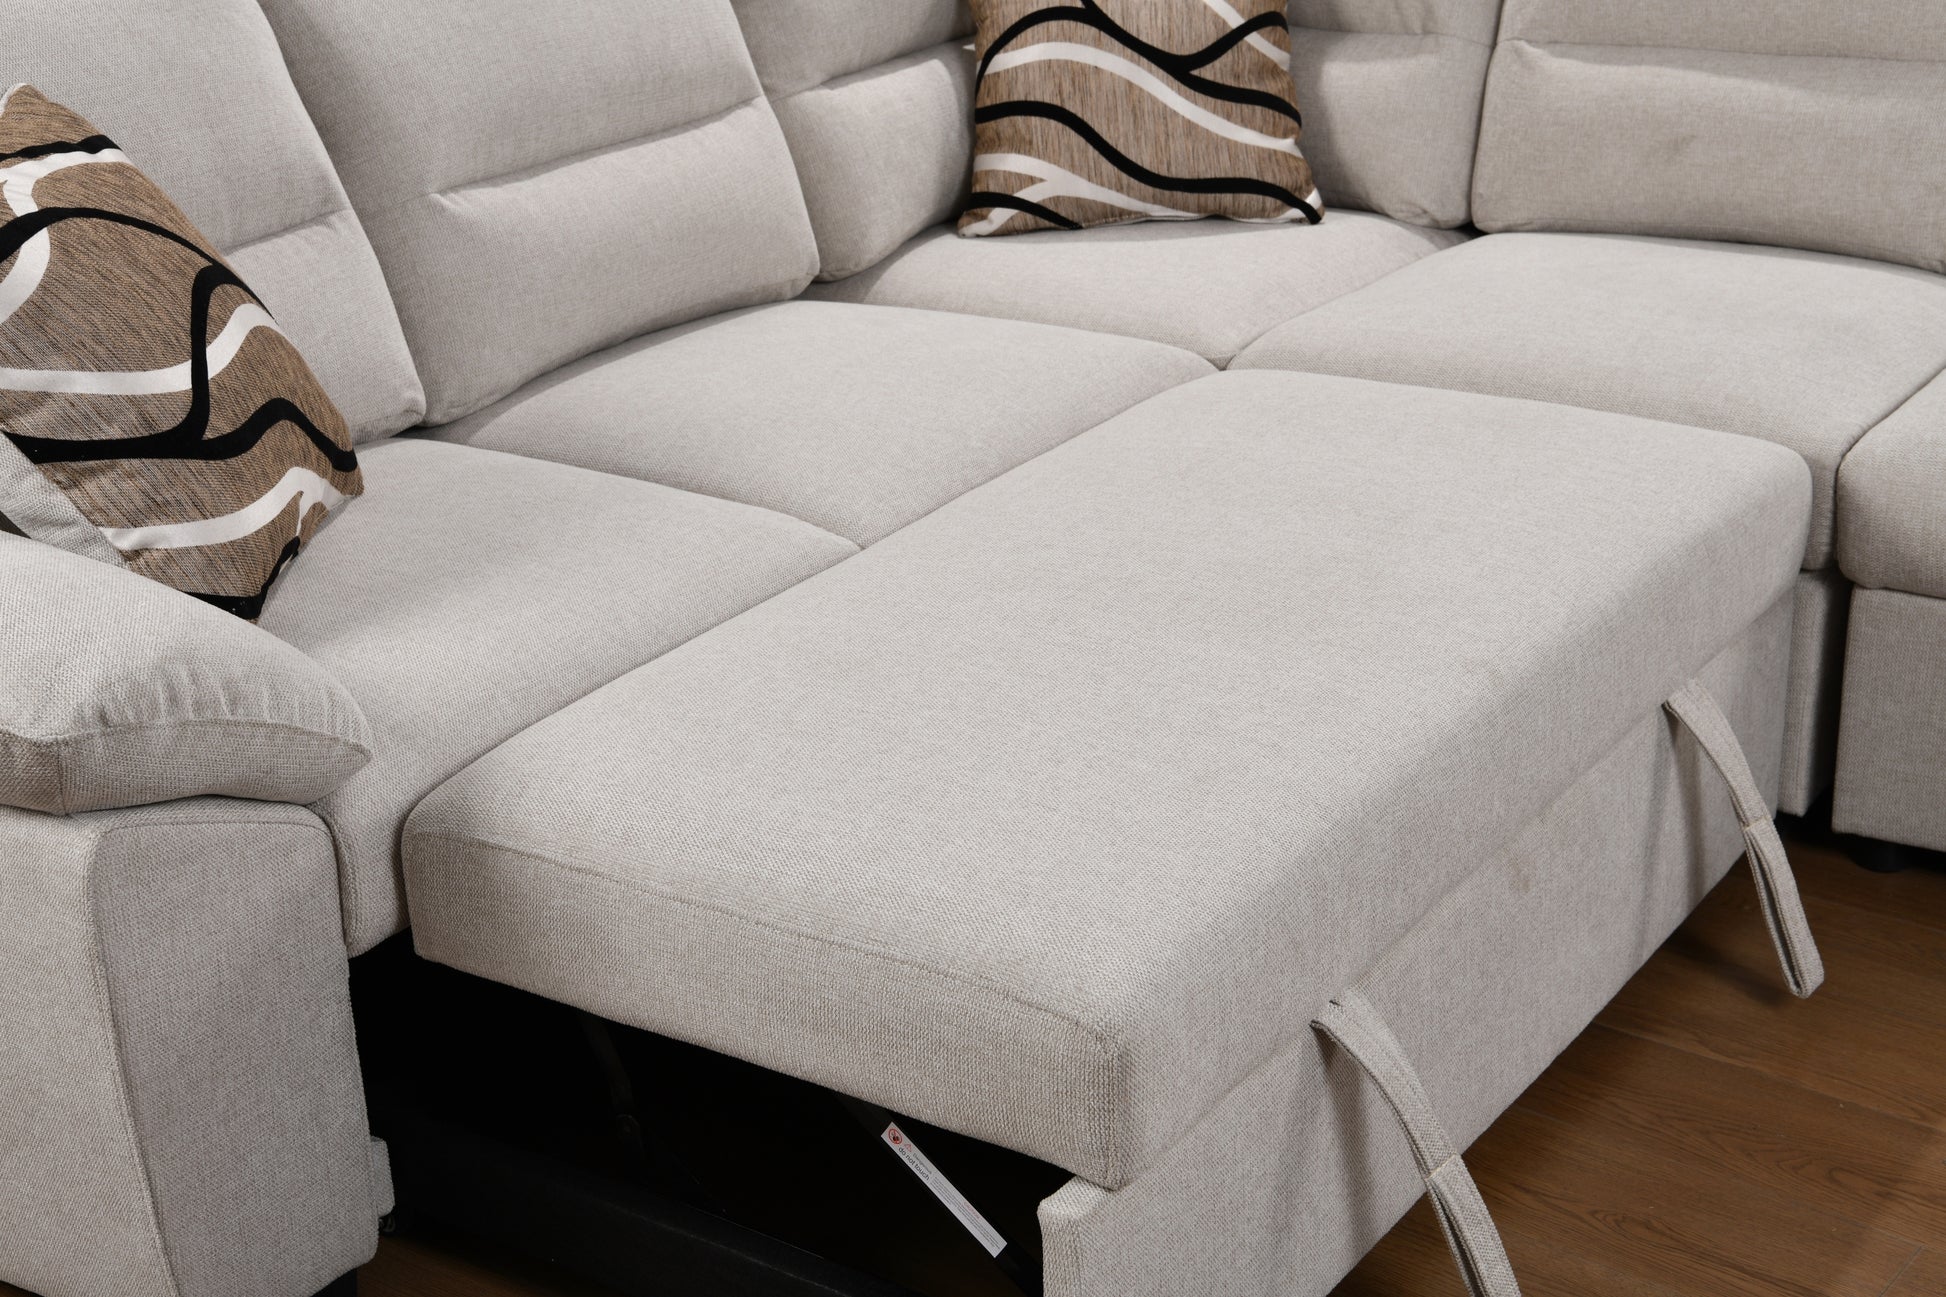 Soft Sectional Sofa with Sleeper, Pull Out Bed, and Storage Ottoman in Beige